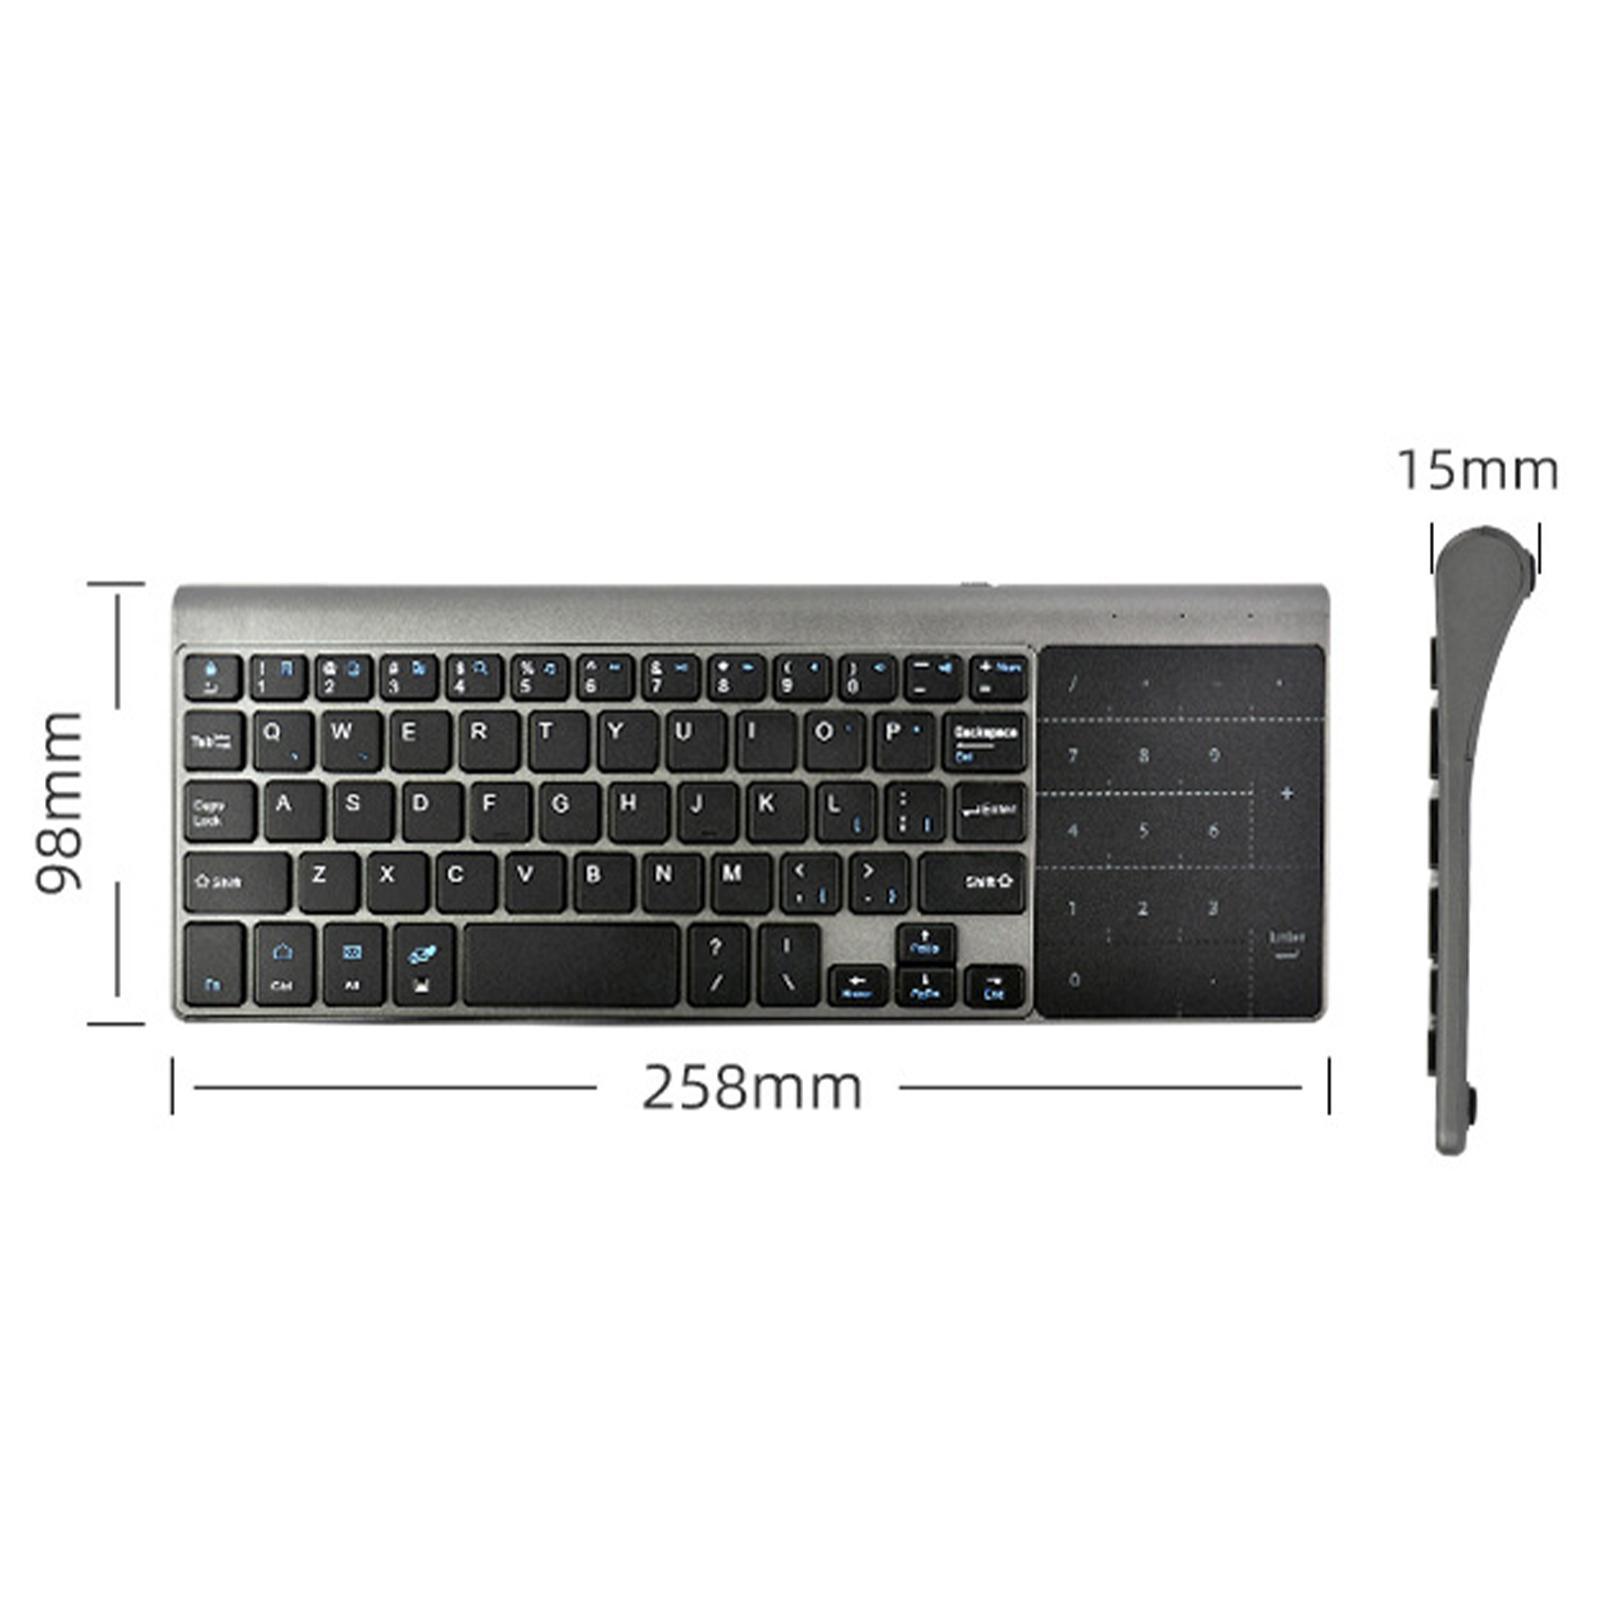 Mini Wireless Keyboard with USB Receiver Universal Portable for PC Notebook